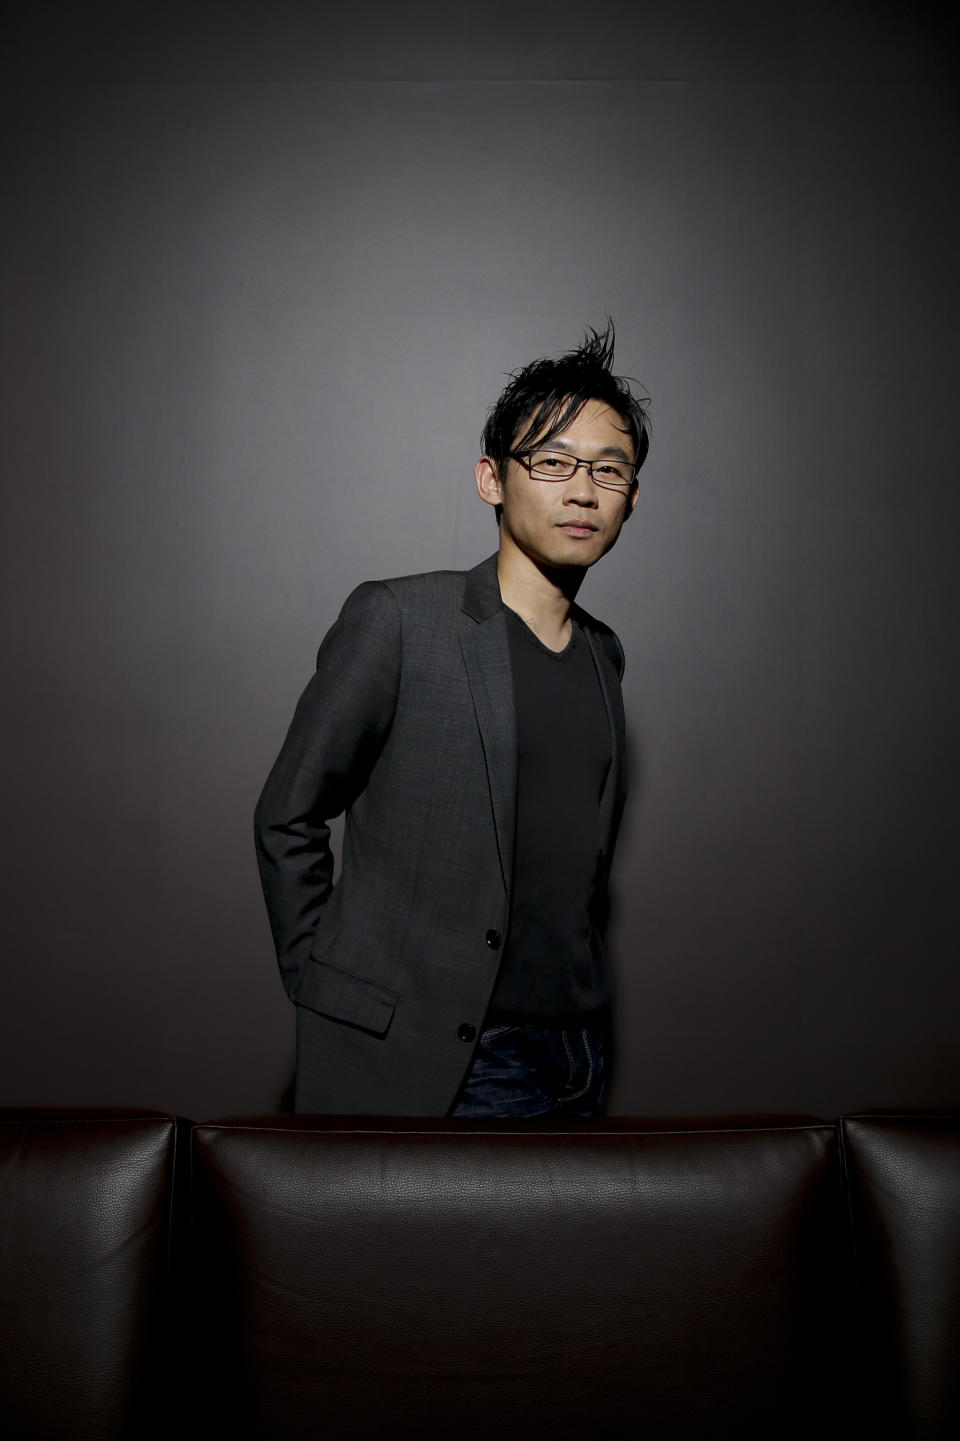 In this Monday, June 17, 2013 photo, Malaysian-Australian director James Wan poses for photos at the Paramount Pictures Studios in Los Angeles. Wan has been splitting his days this summer between pre-production on the seventh "Fast & Furious" film and putting the finishing touches on his indie scare-fest "Insidious 2," due in September. (AP Photo/Jae C. Hong)